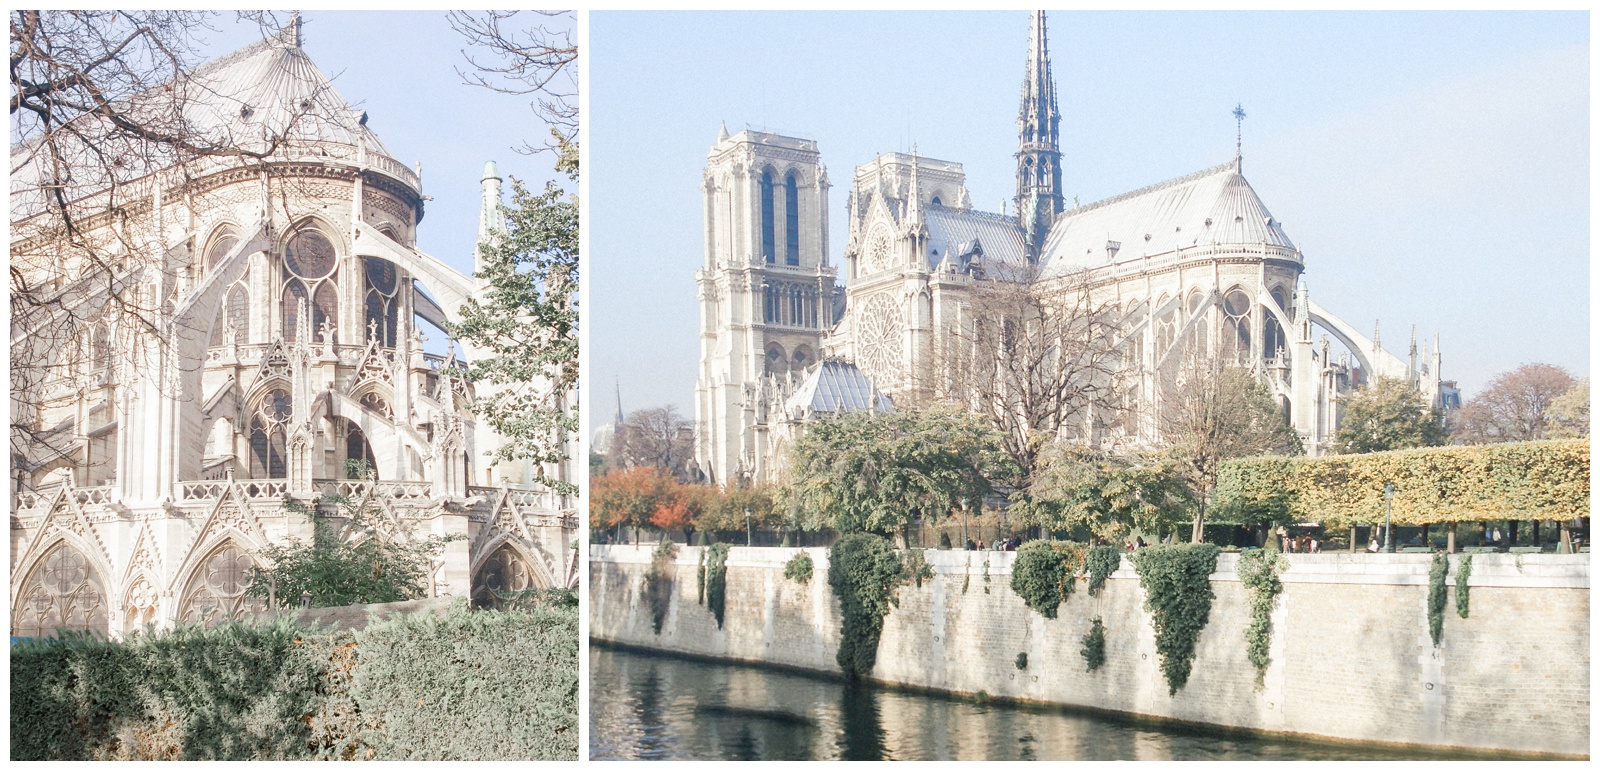 Notre Dame Cathedral, Paris, France, flying buttresses